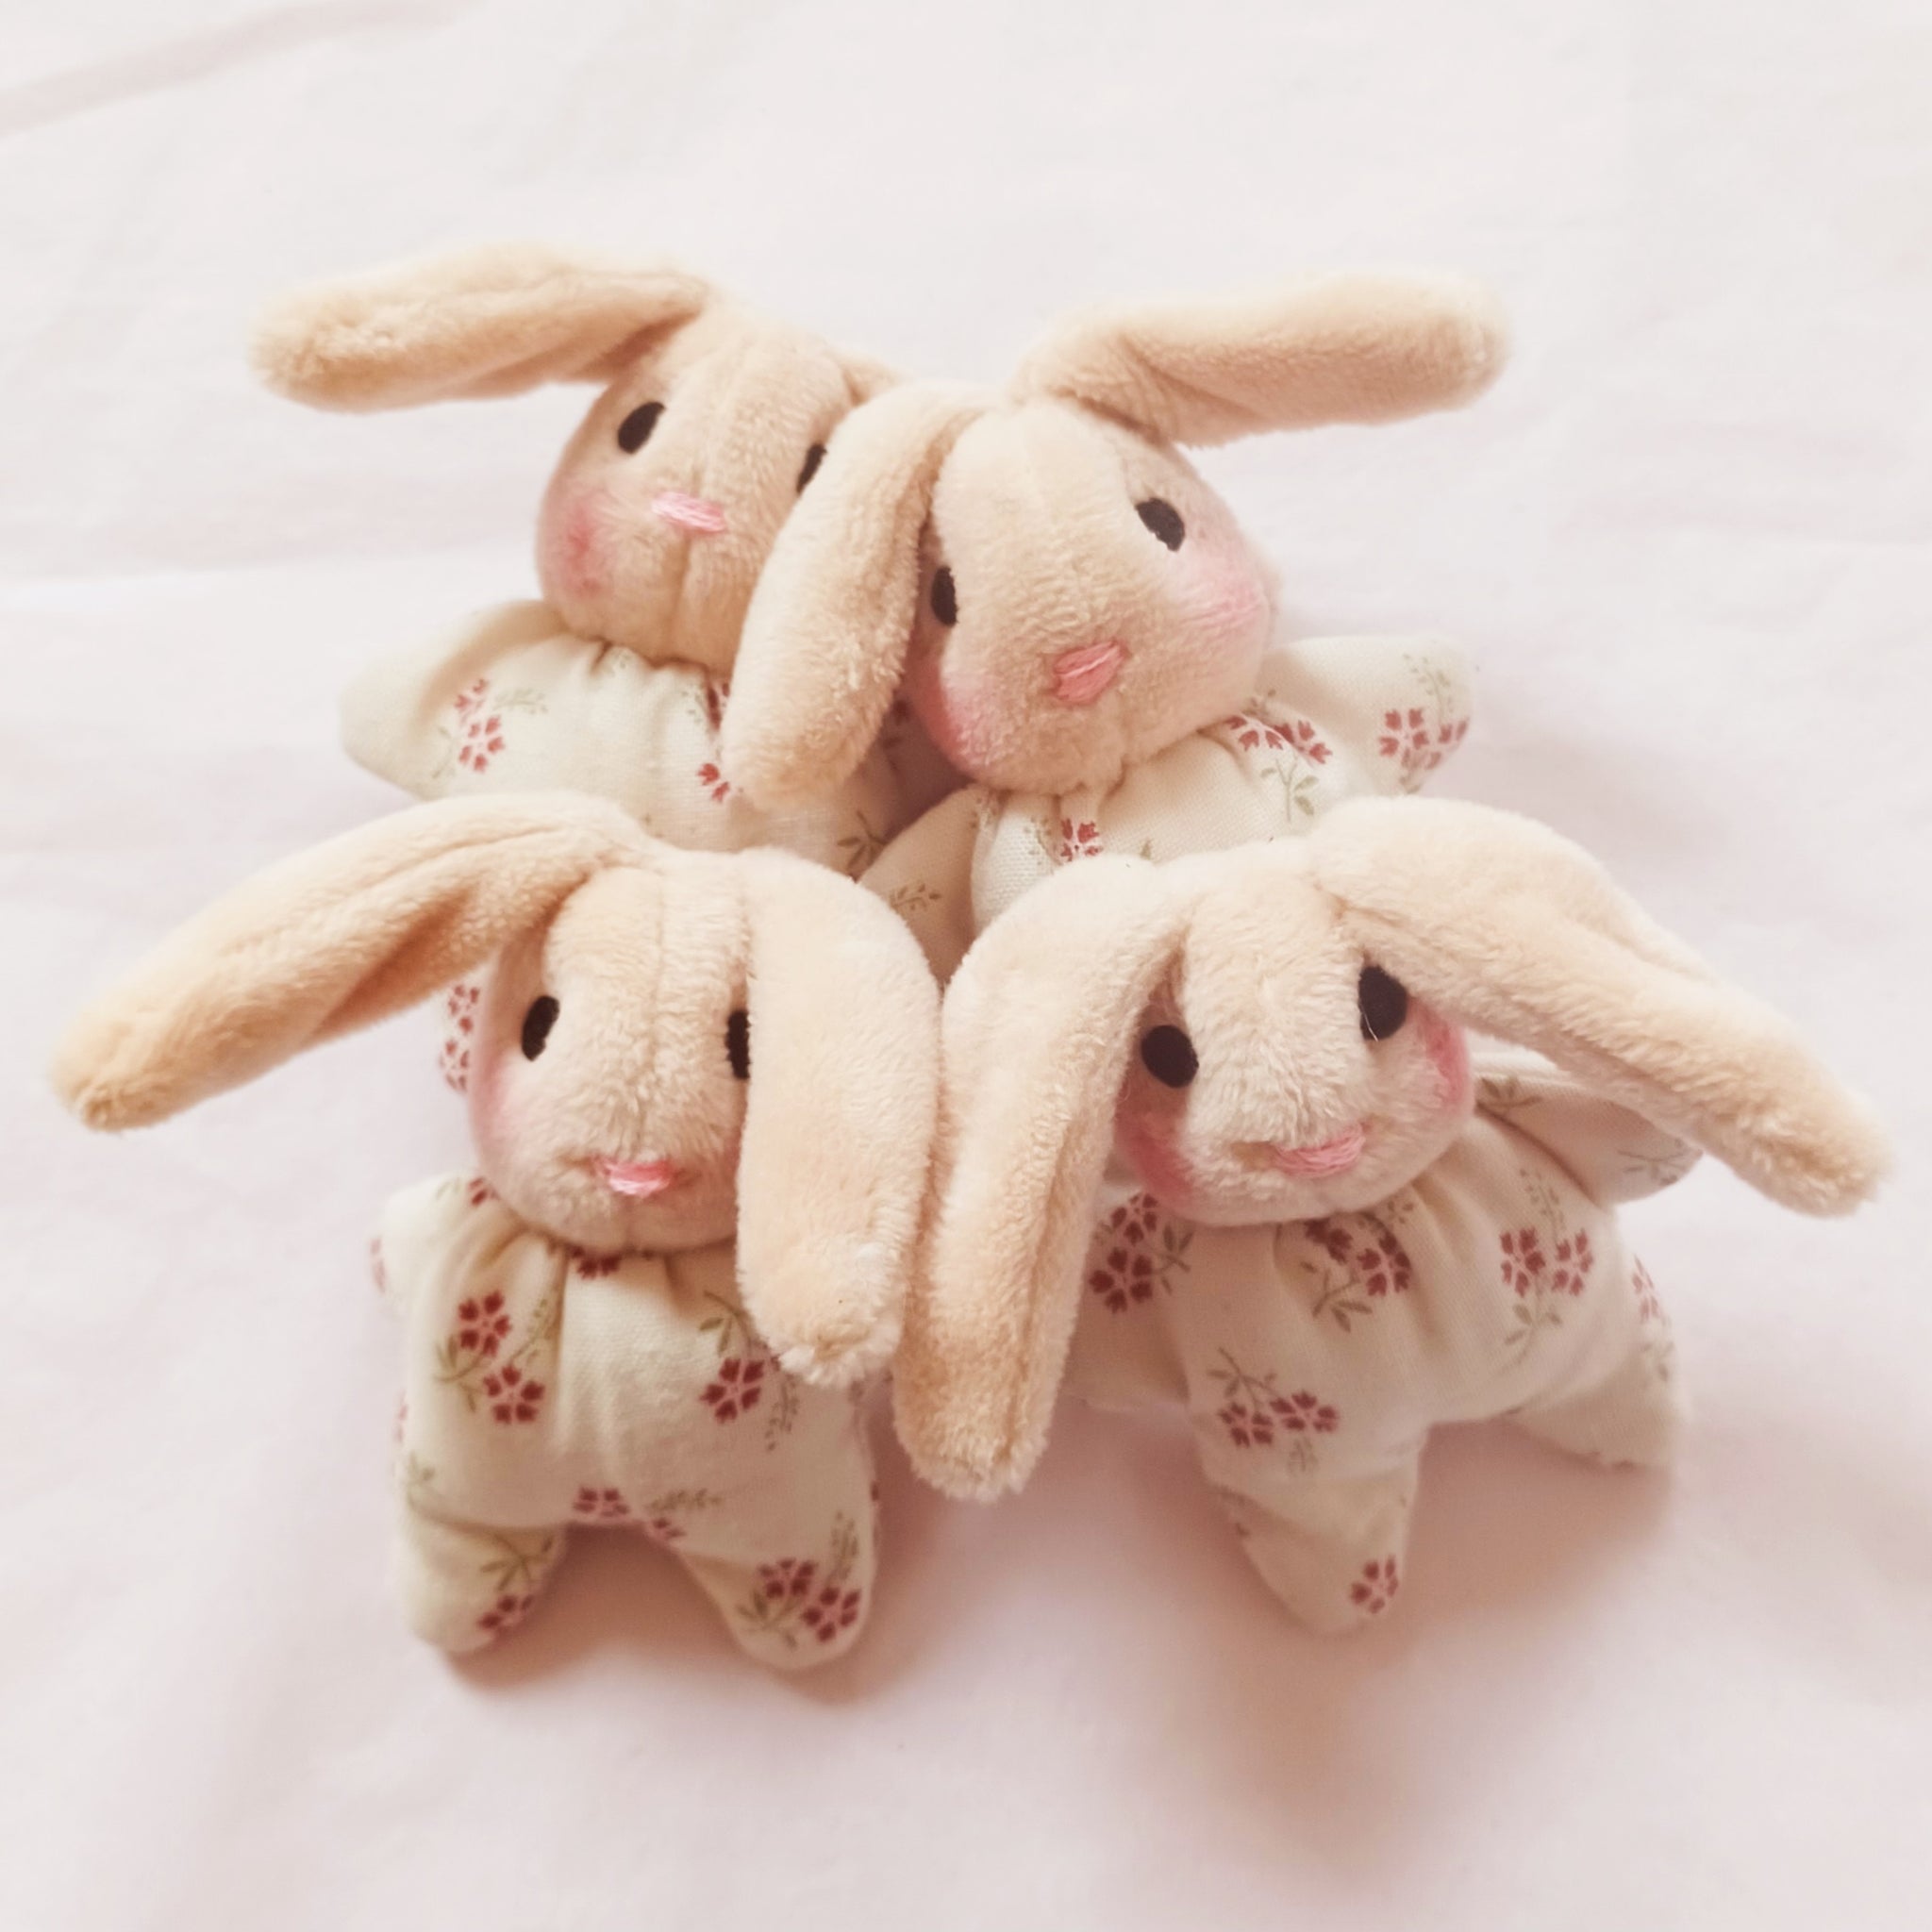 Tiny bunnies - vintage style print, lop eared.